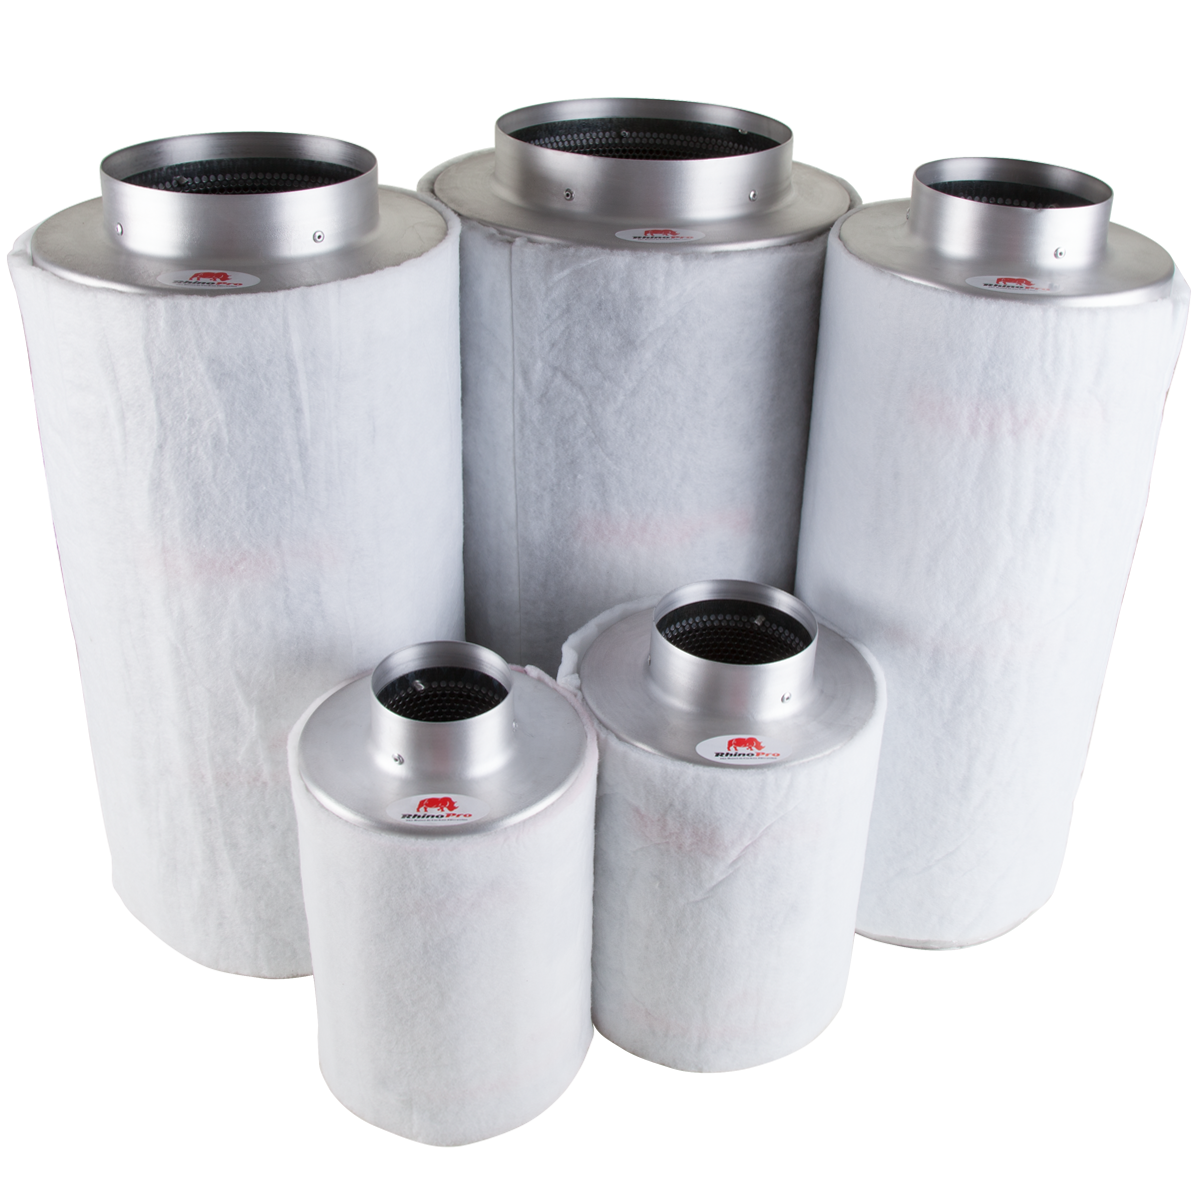 Rhino Pro Carbon Filters